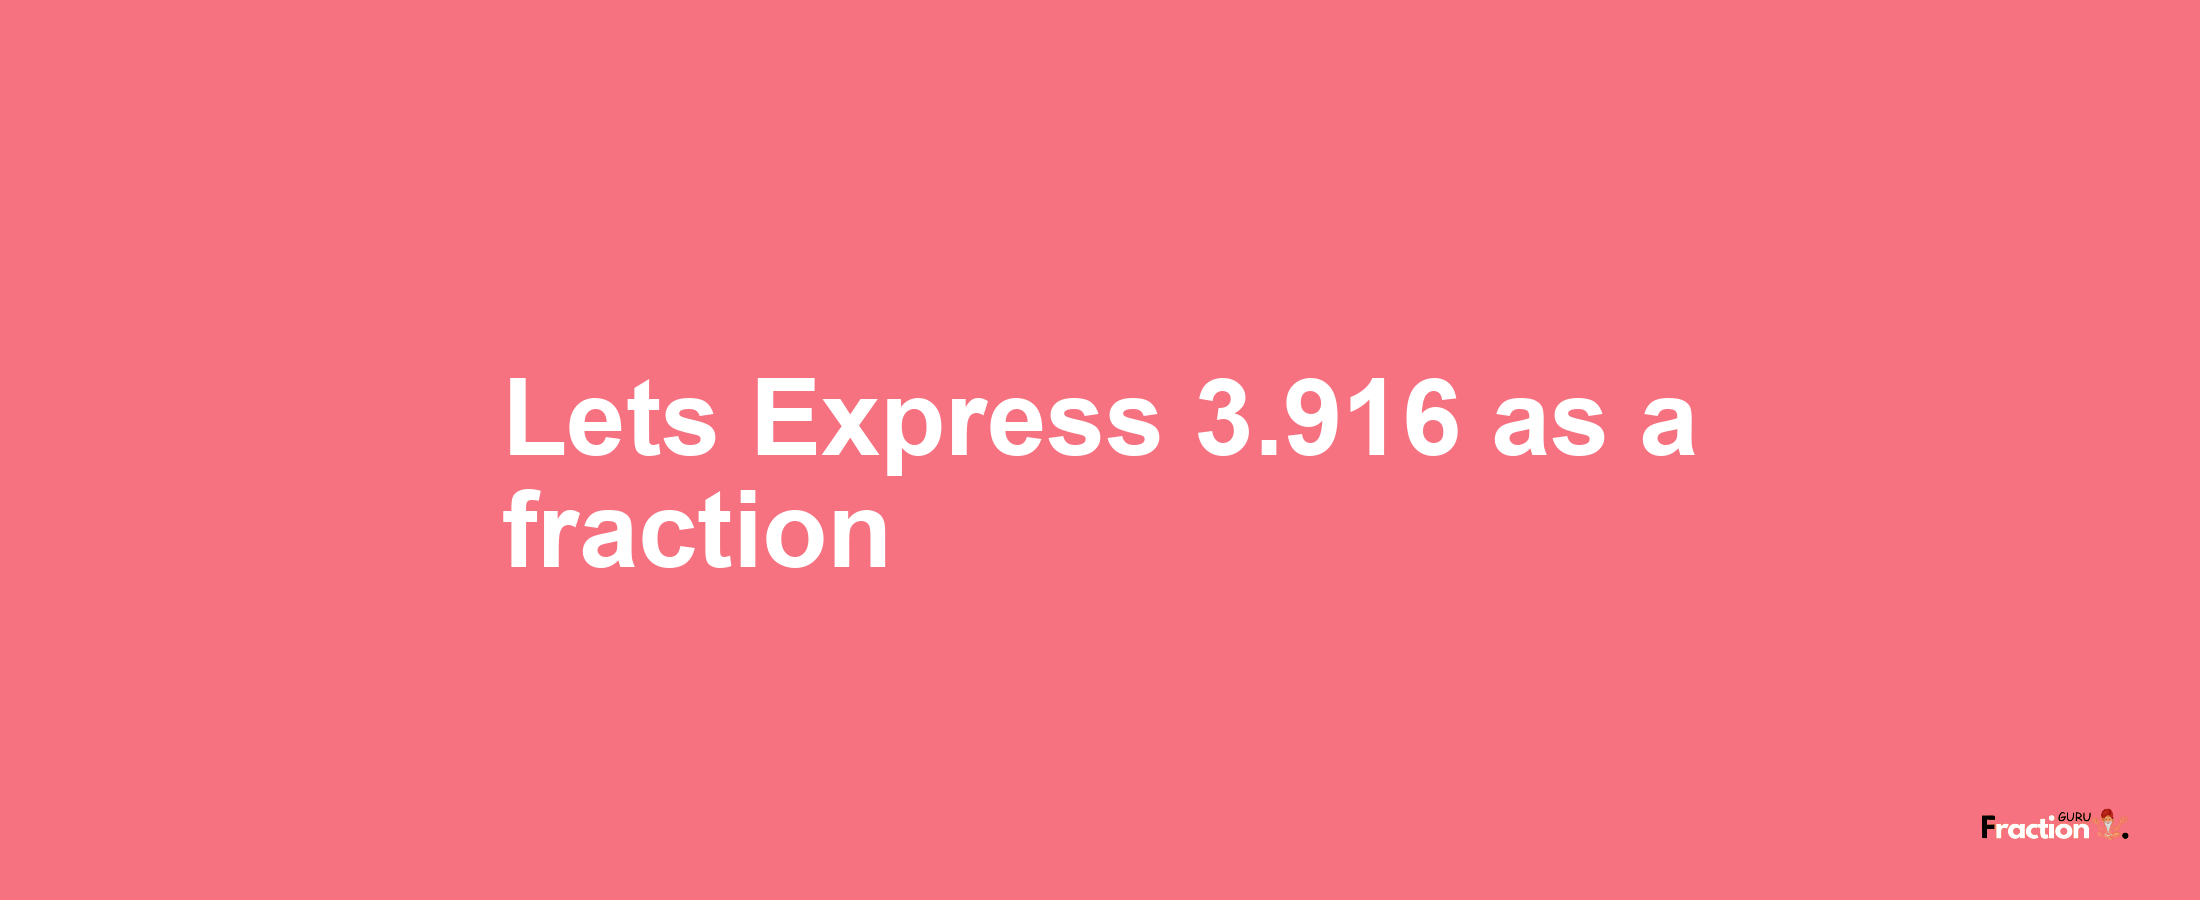 Lets Express 3.916 as afraction